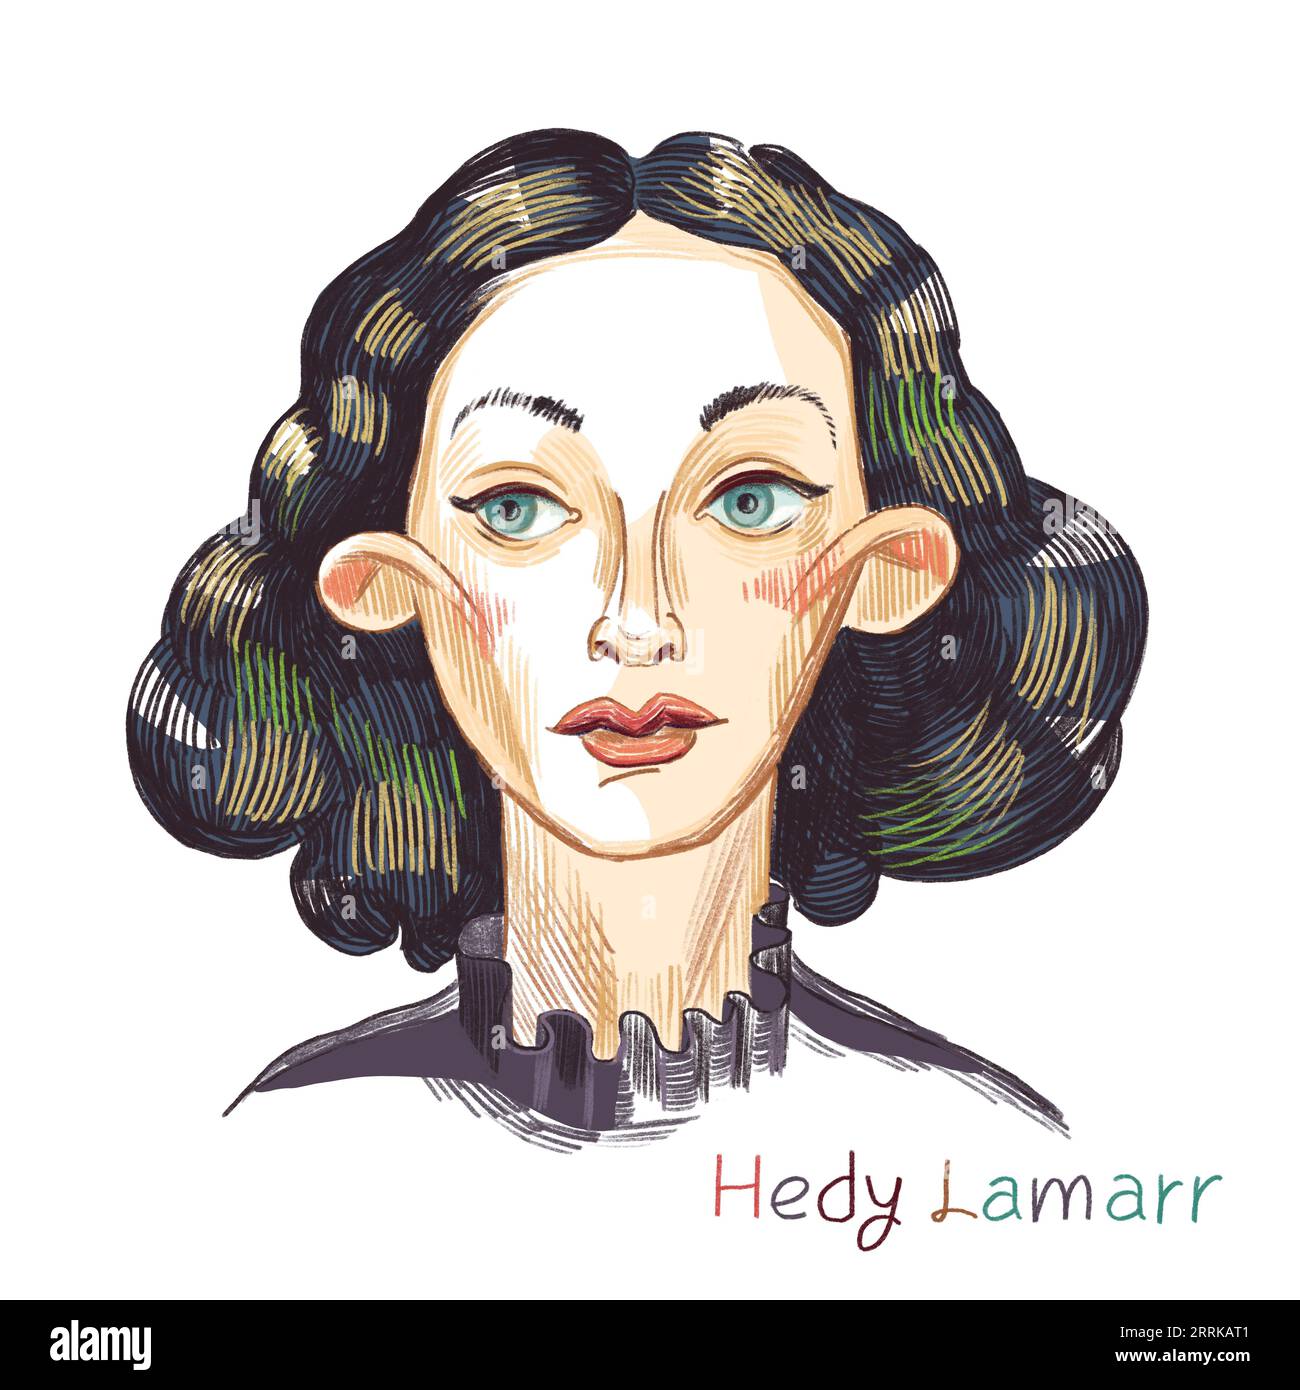 Hedy Lamarr colored pencil hatched portrait on white background. Austrian-born Austro-Hungarian-American actress and inventor.She was a film star duri Stock Photo